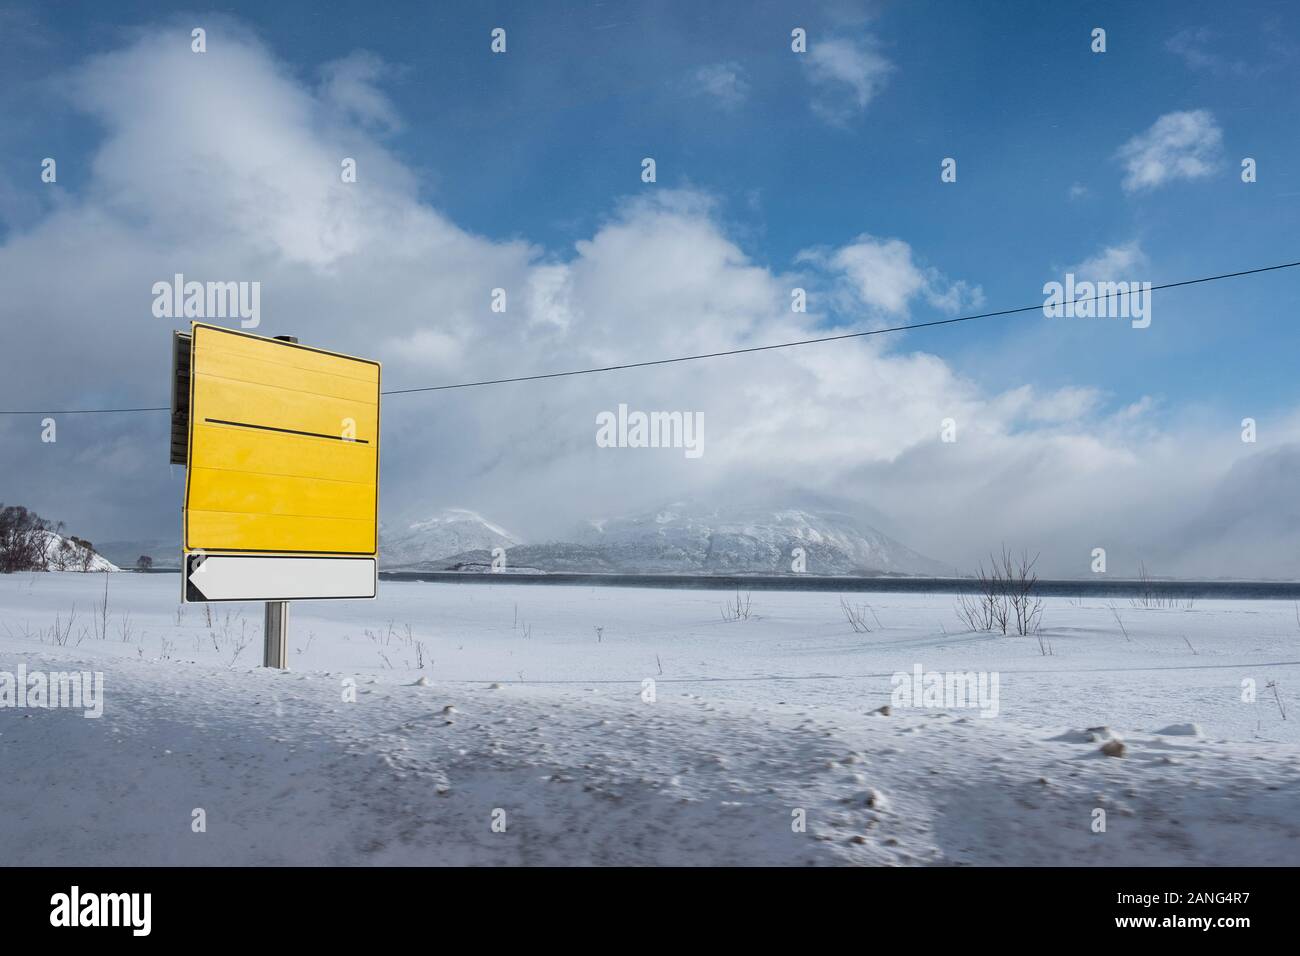 Yellow traffic signboard on snow covered roadside at coastline Stock Photo